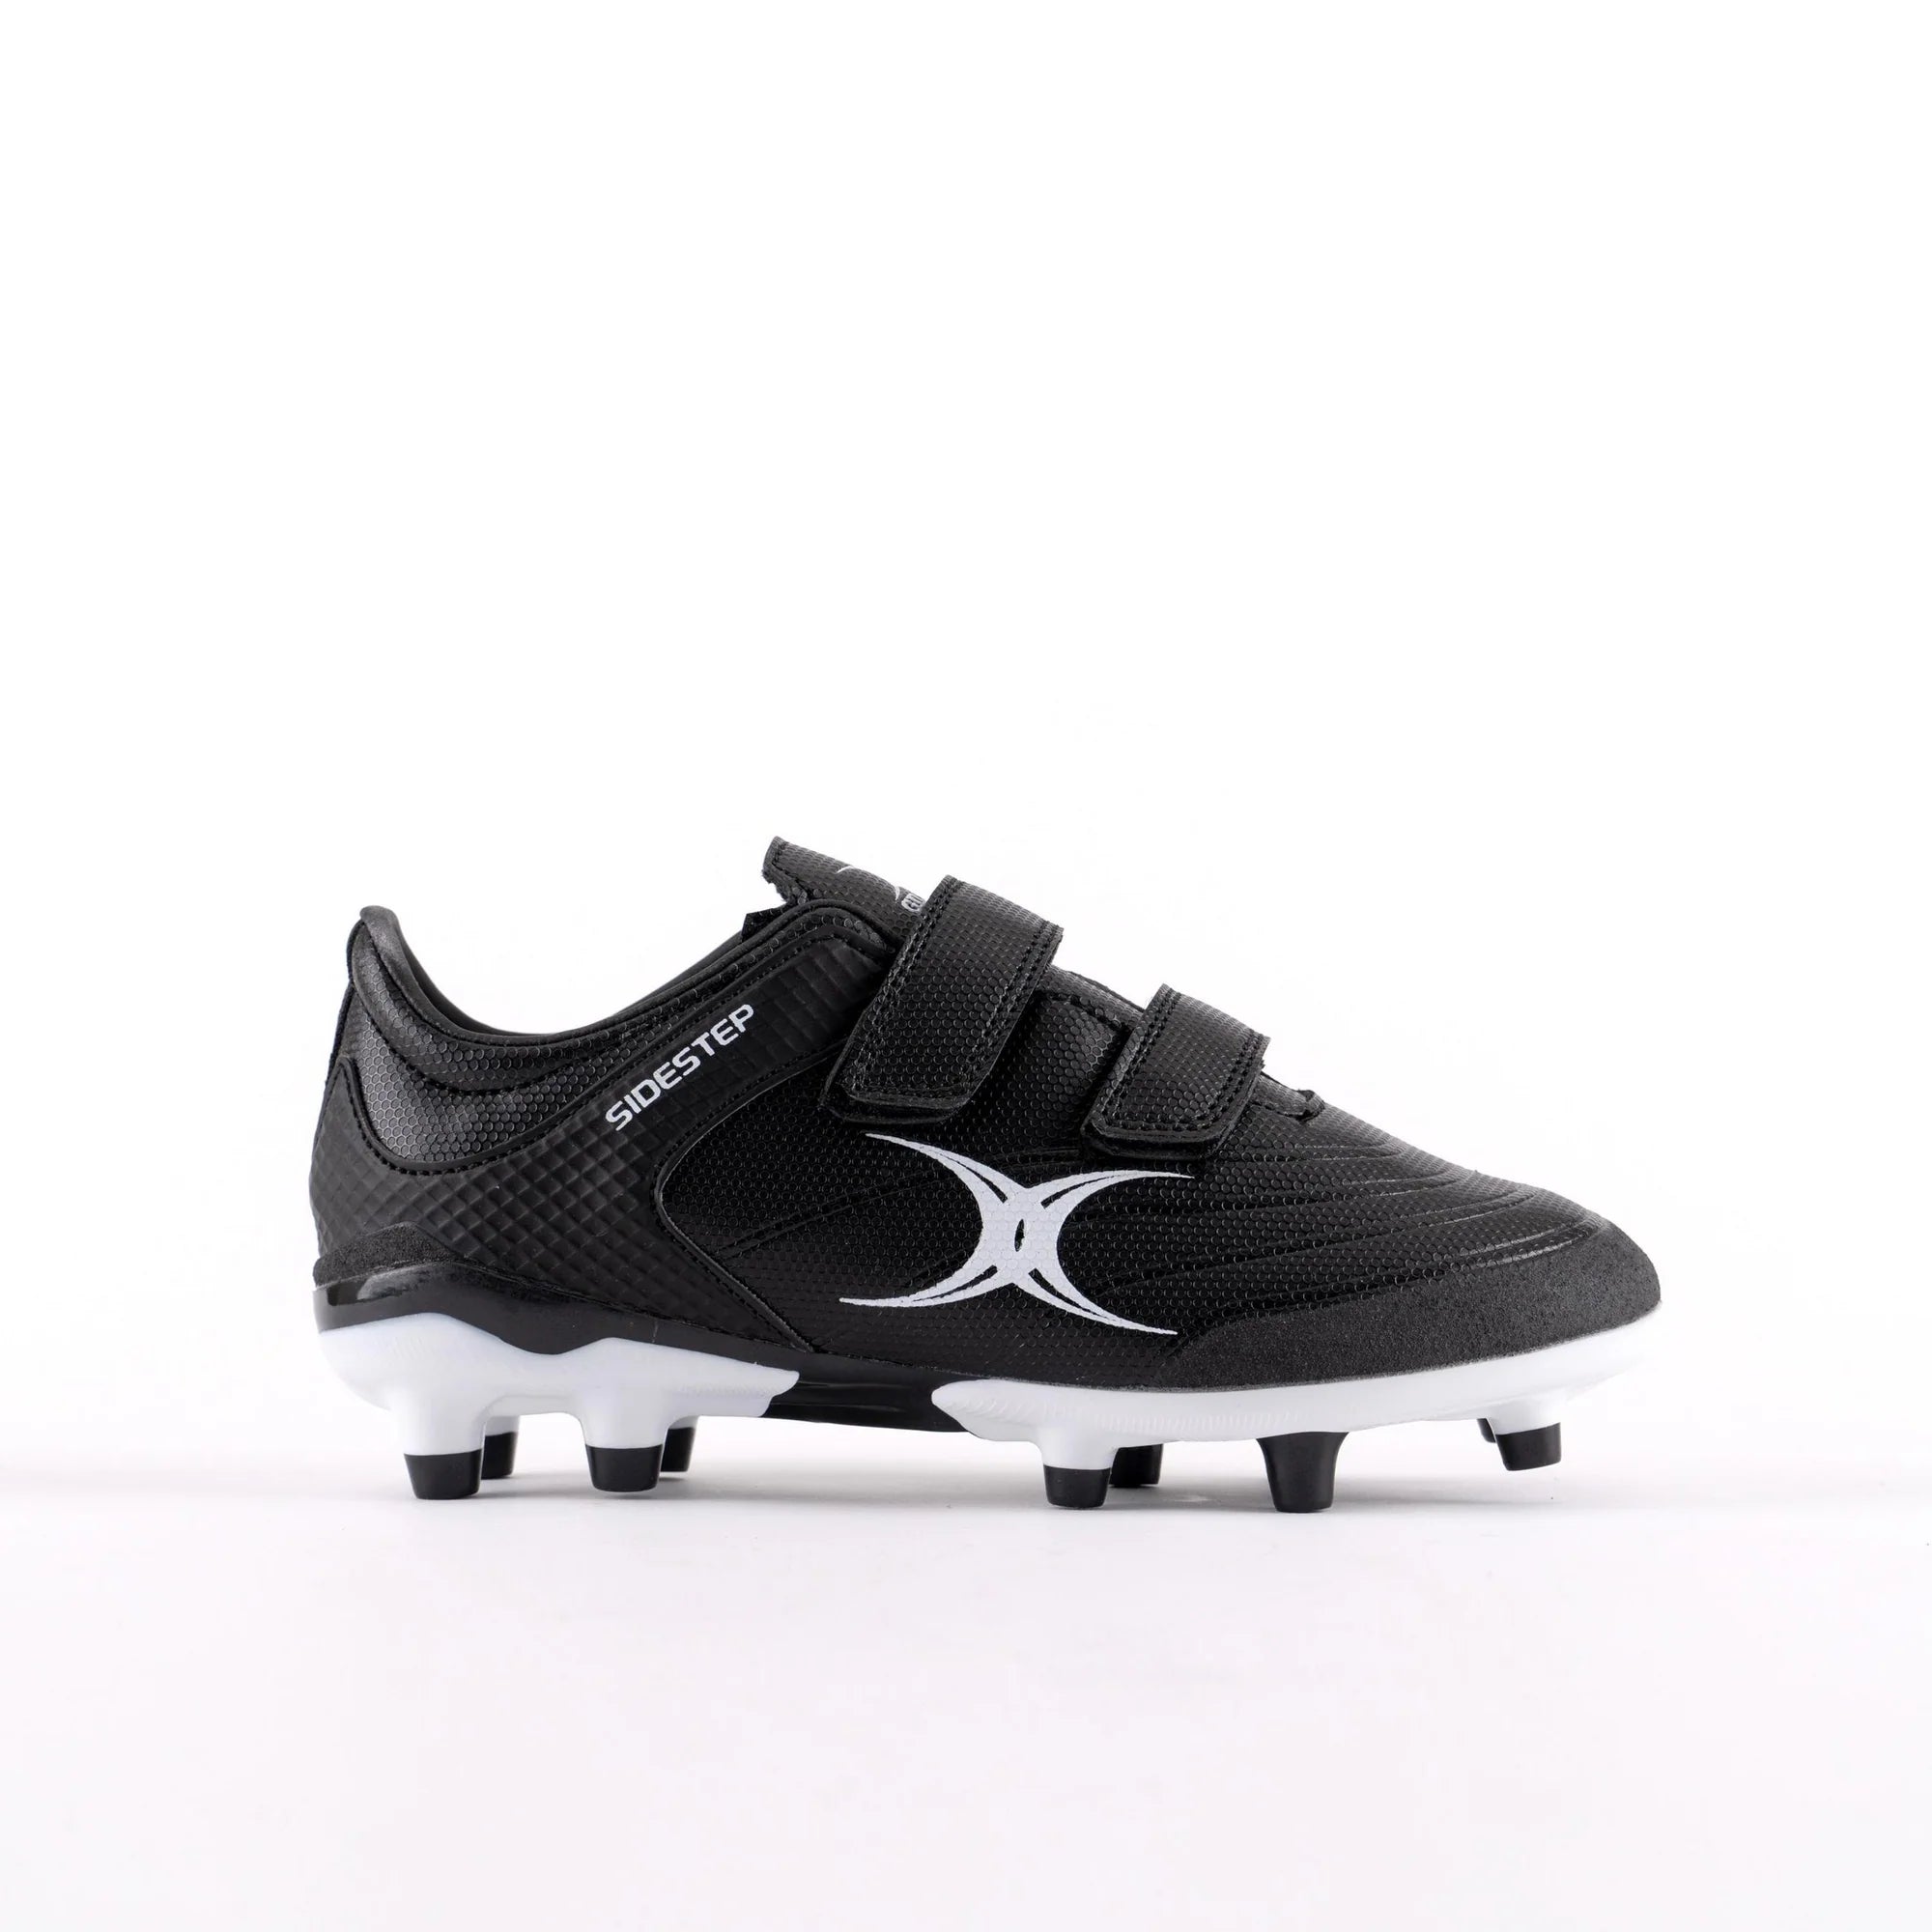 Kids S/ST X15 Firm Ground Rugby Boot